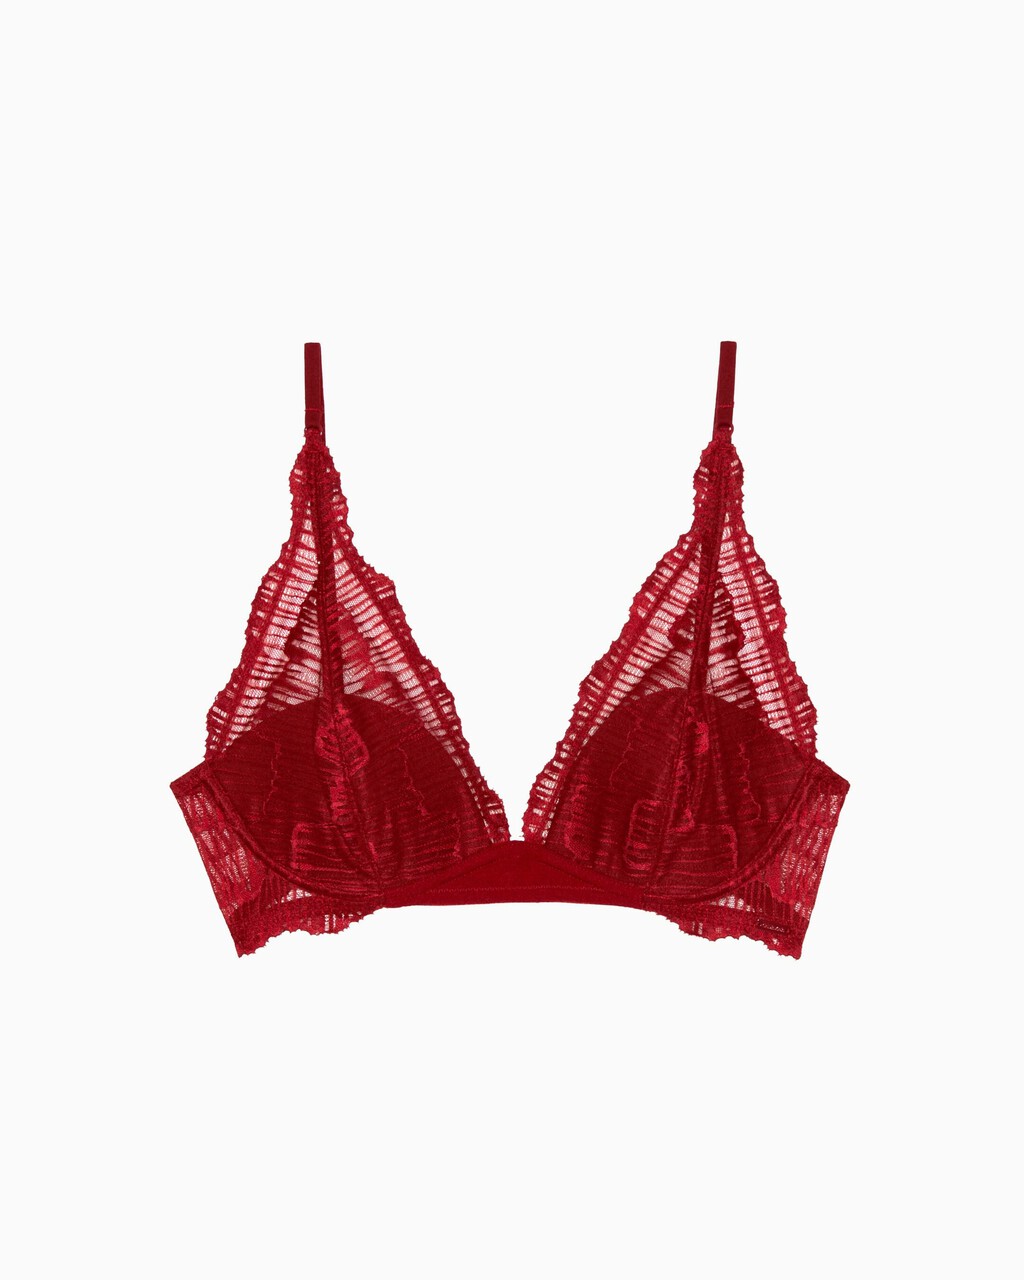 CK Black Linear Lace Lightly Lined Triangle Bra, Red Carpet, hi-res